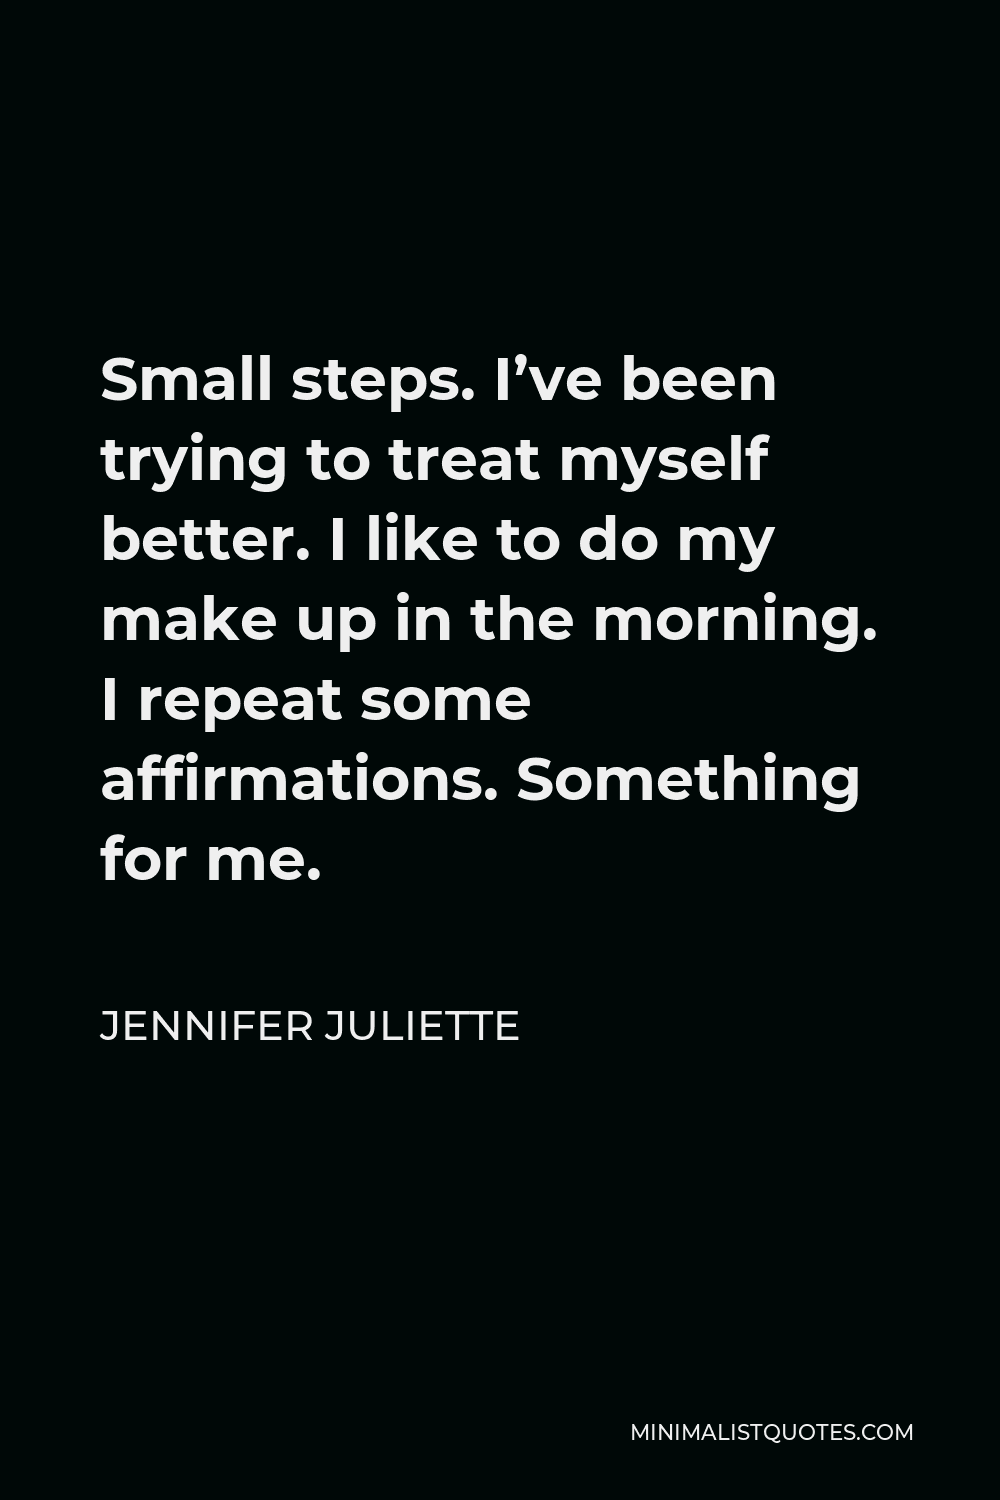 Jennifer Juliette Quote - Small steps. I’ve been trying to treat myself better. I like to do my make up in the morning. I repeat some affirmations. Something for me.